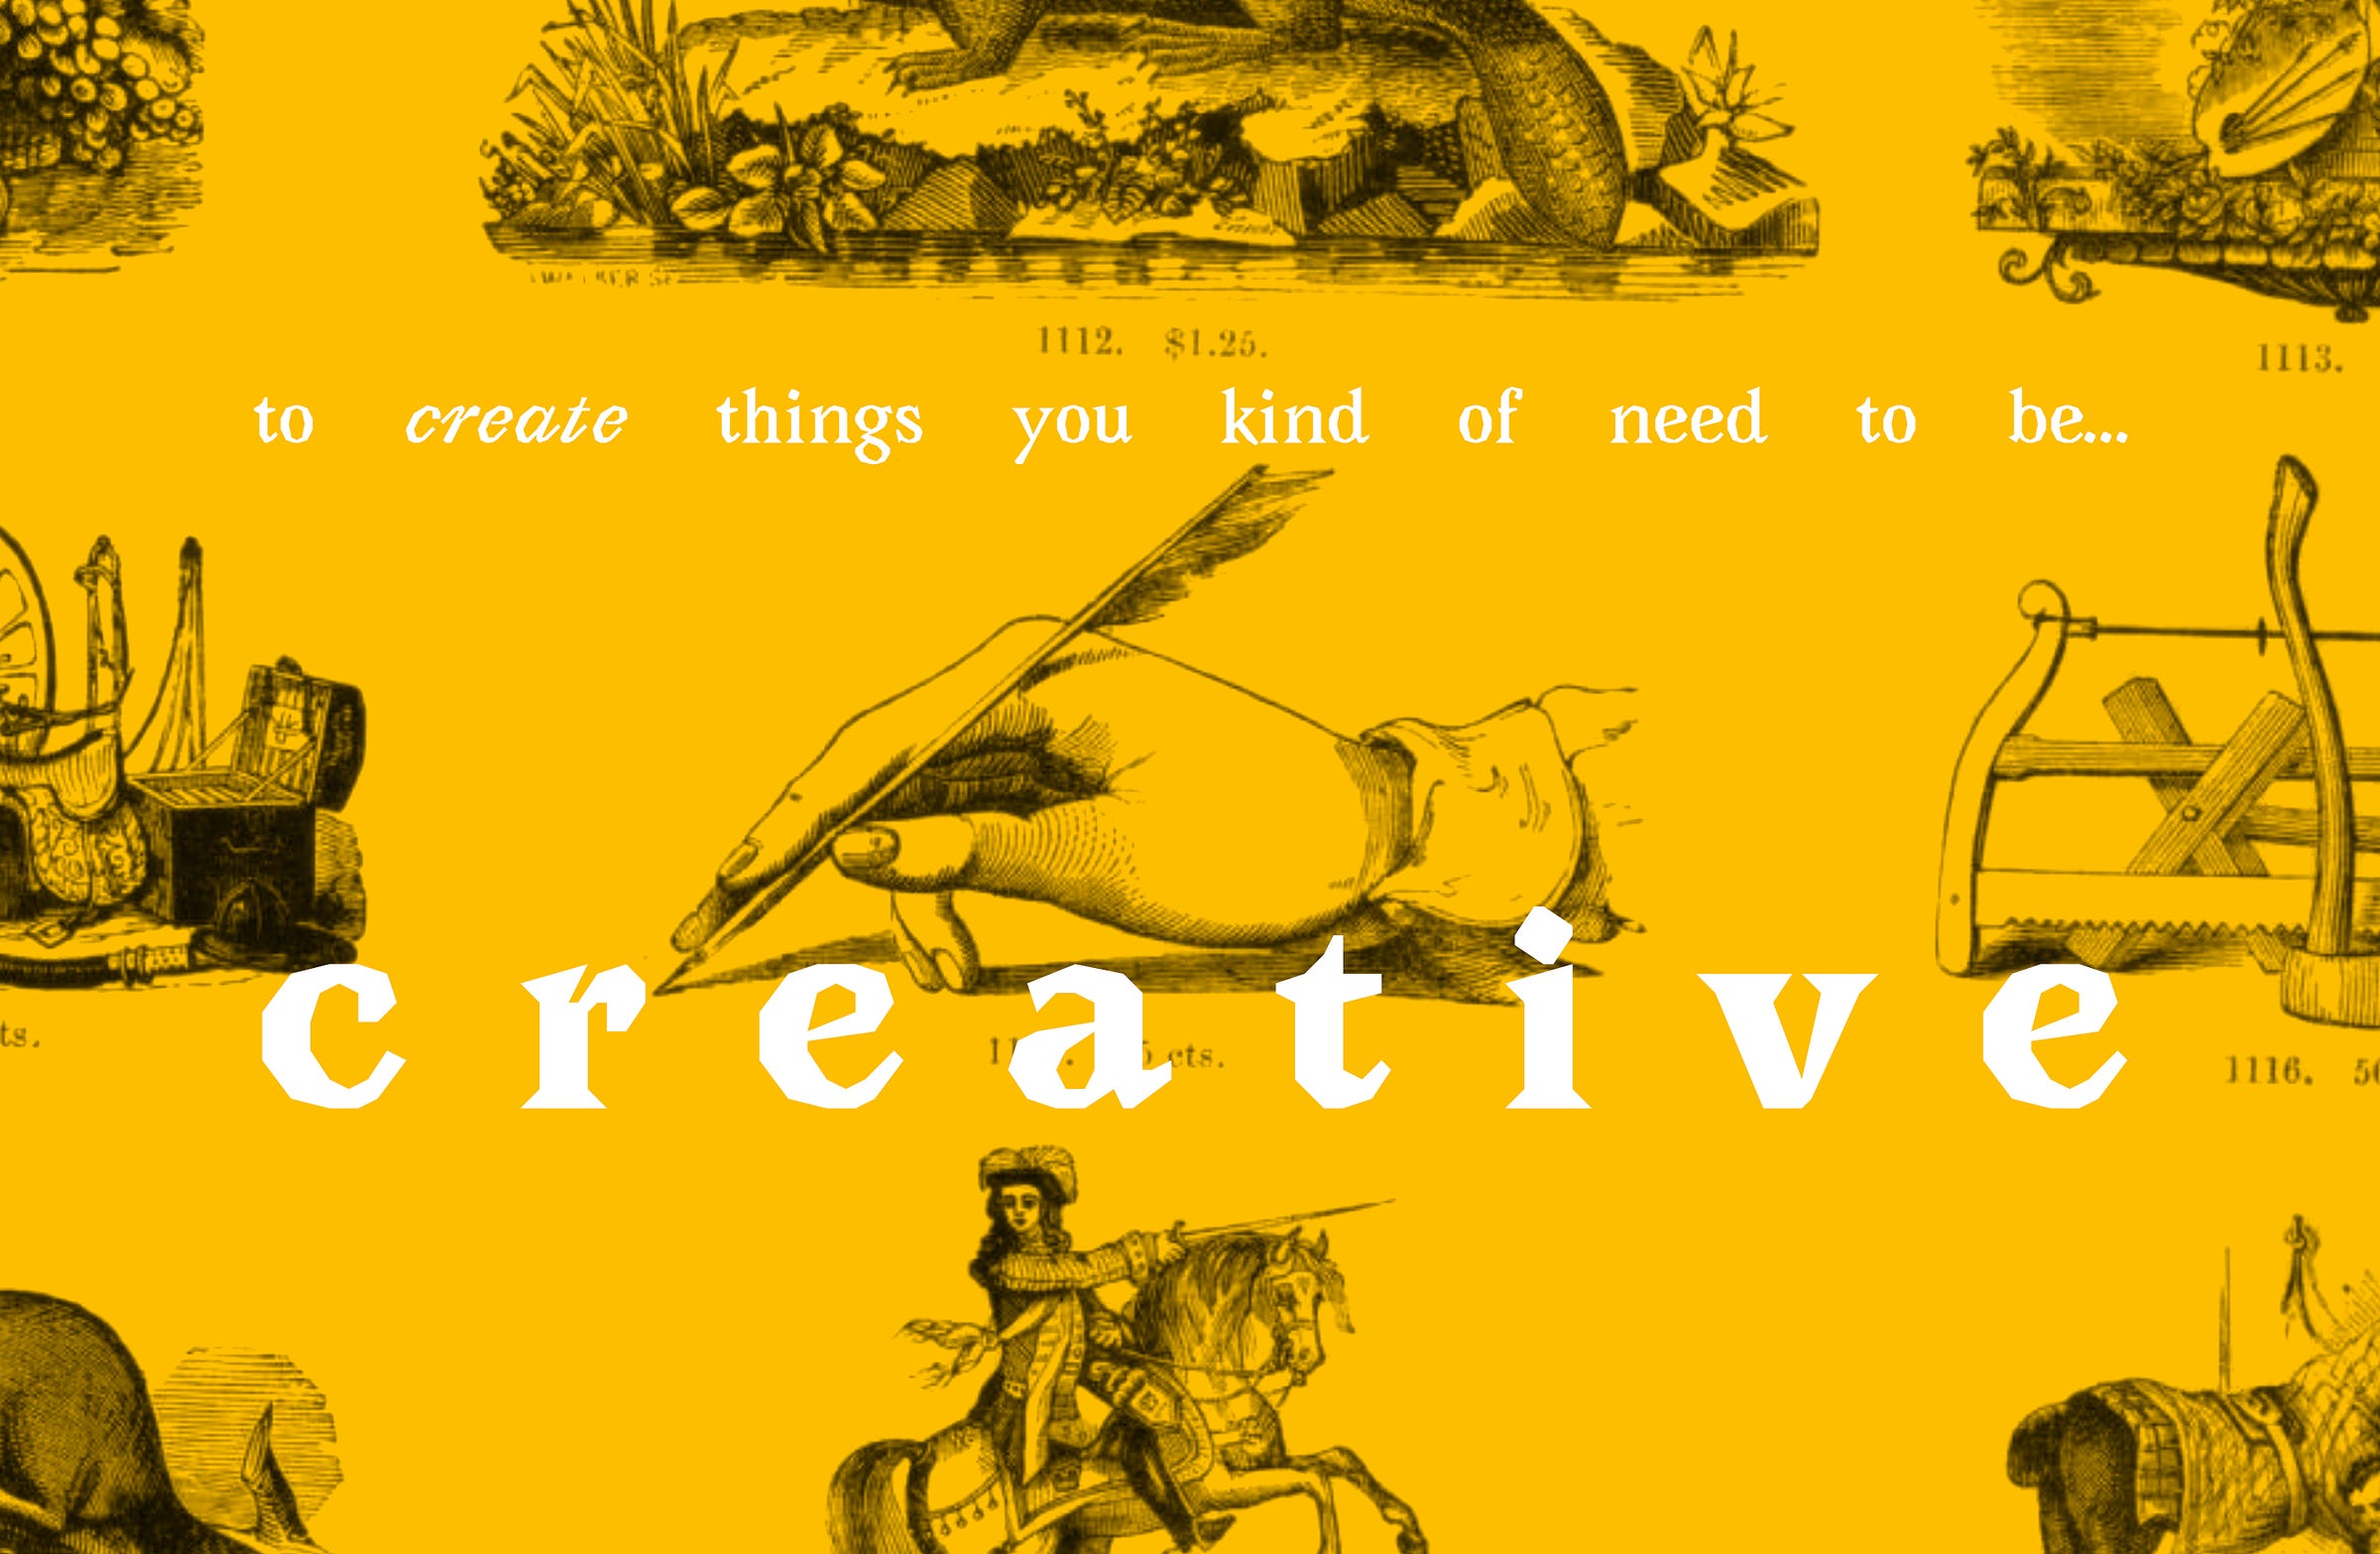 Image with old illustrations from a type specimen book. At the centre is a hand holding a quill. In a stylized font on top of the image, it reads: "to create things you kind of need to be... creative"